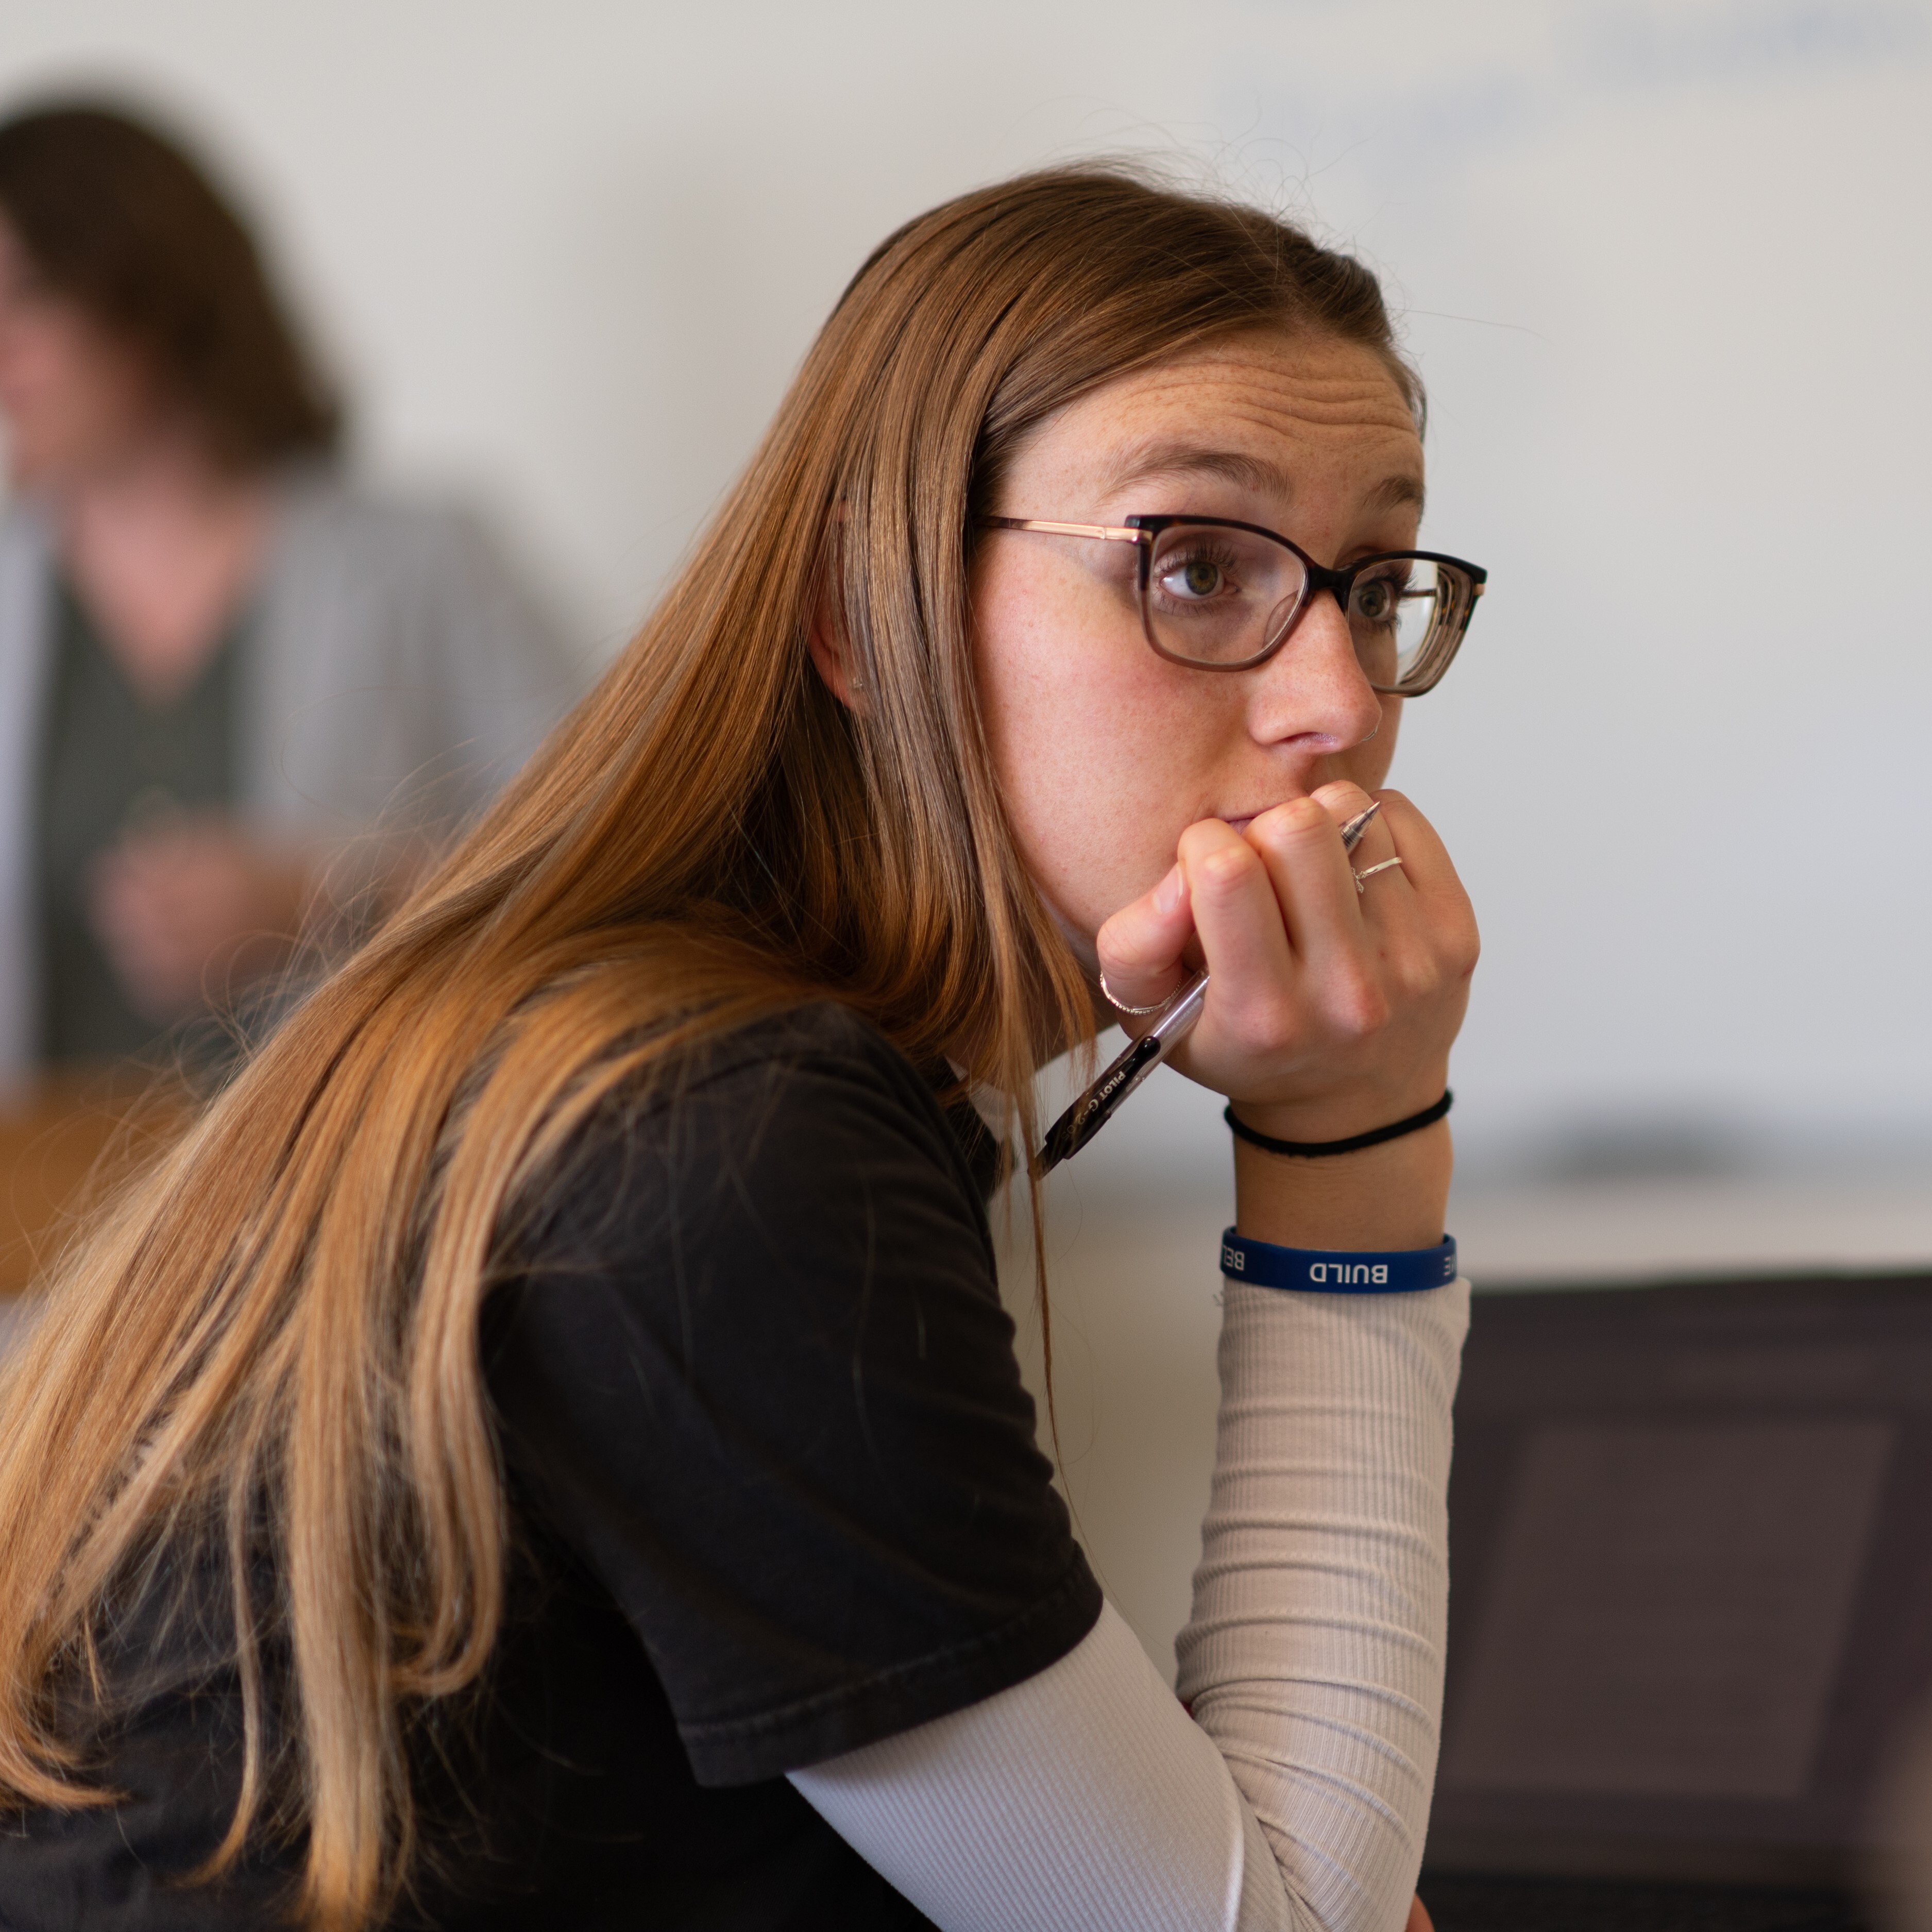 Female student engaged in class